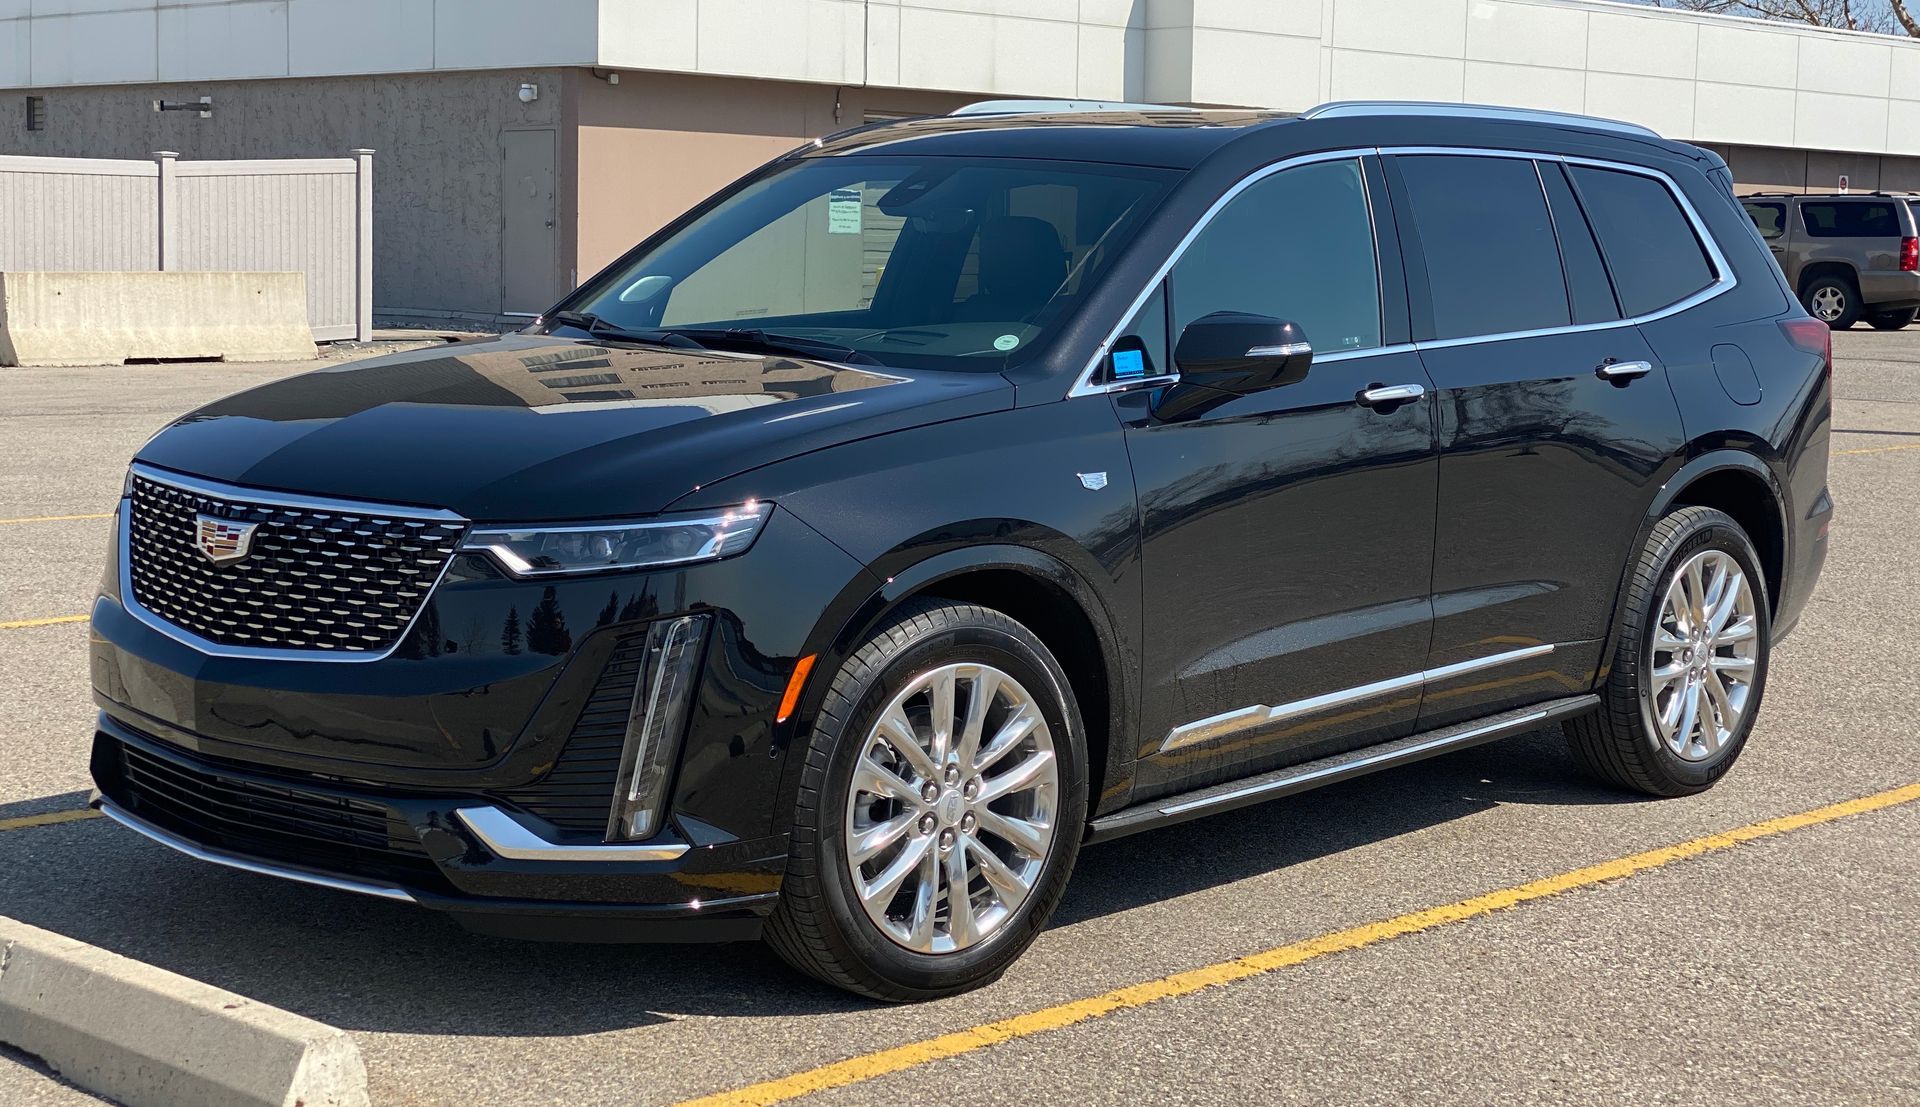 Limo To Go mid size SUV Cadillac XT6 exterior